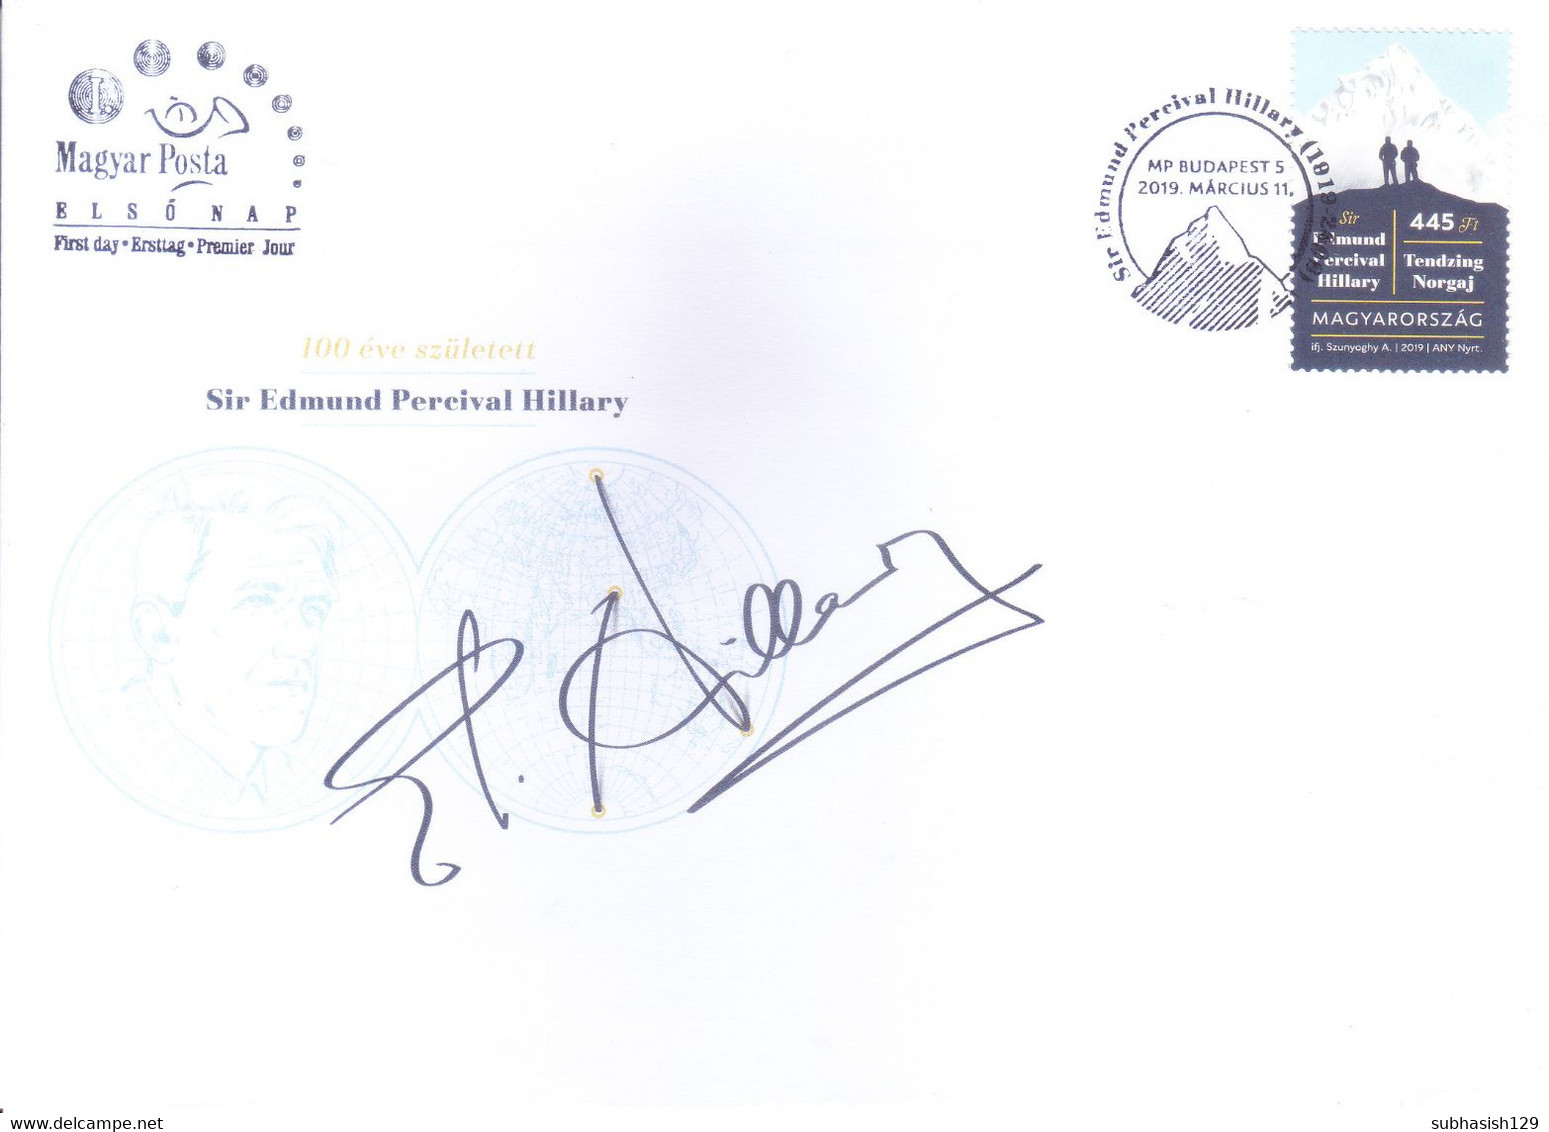 HUNGARY : FIRST DAY COVER : 11 MARCH 2019 : BIRTH CENTENARY OF SIR EDMUND PERCIVAL HILLARY - Lettres & Documents